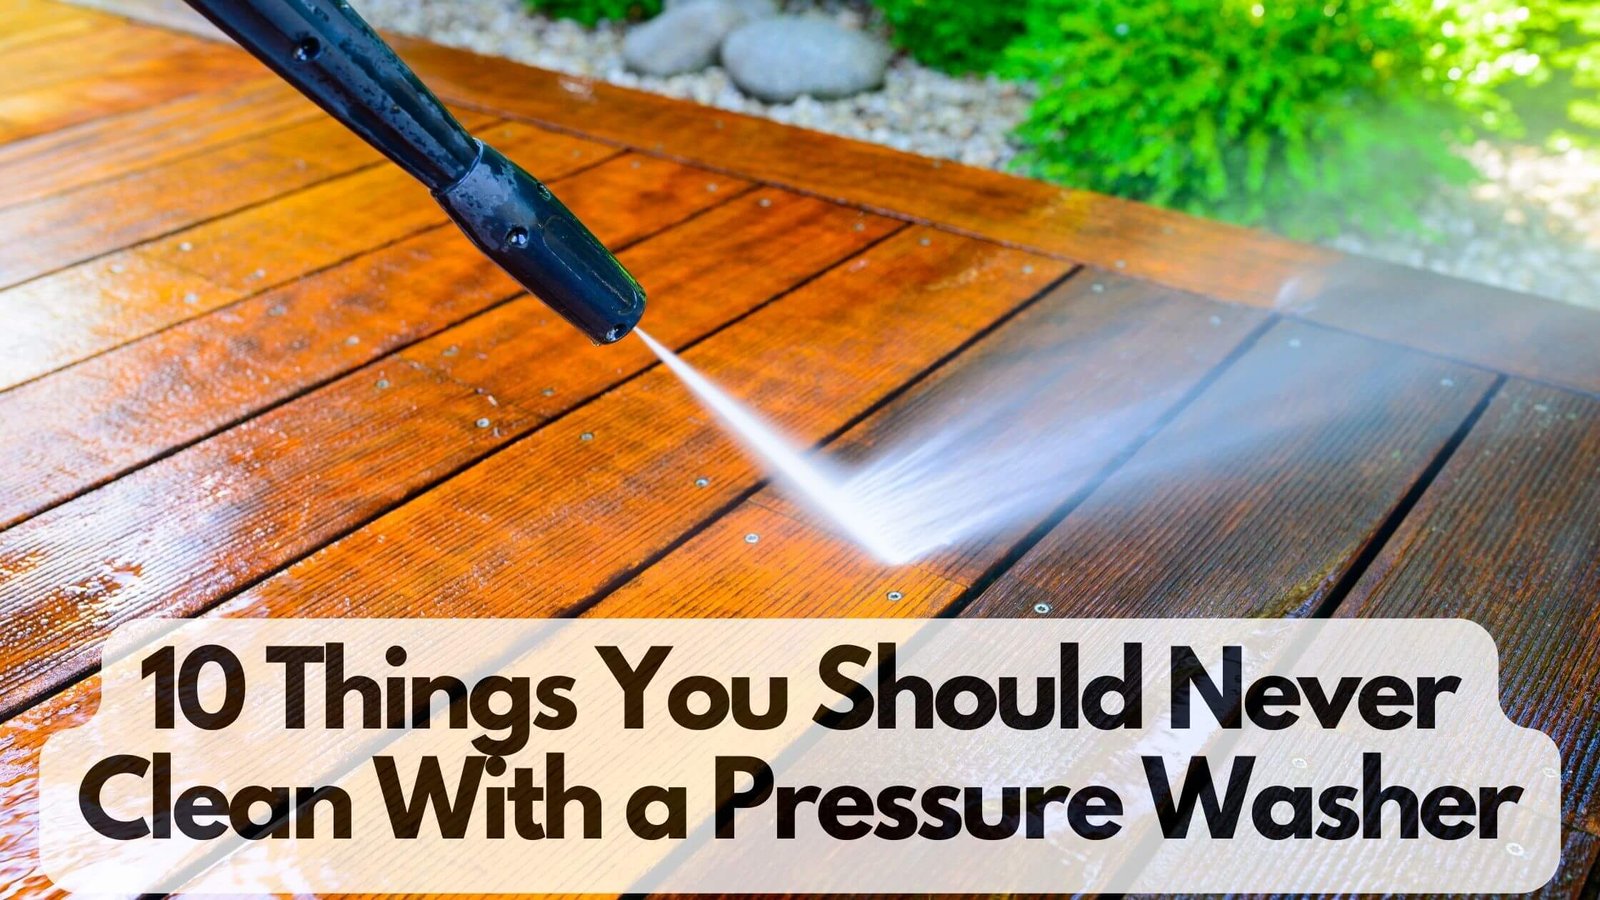 10 Things You Should Never Clean With a Pressure Washer